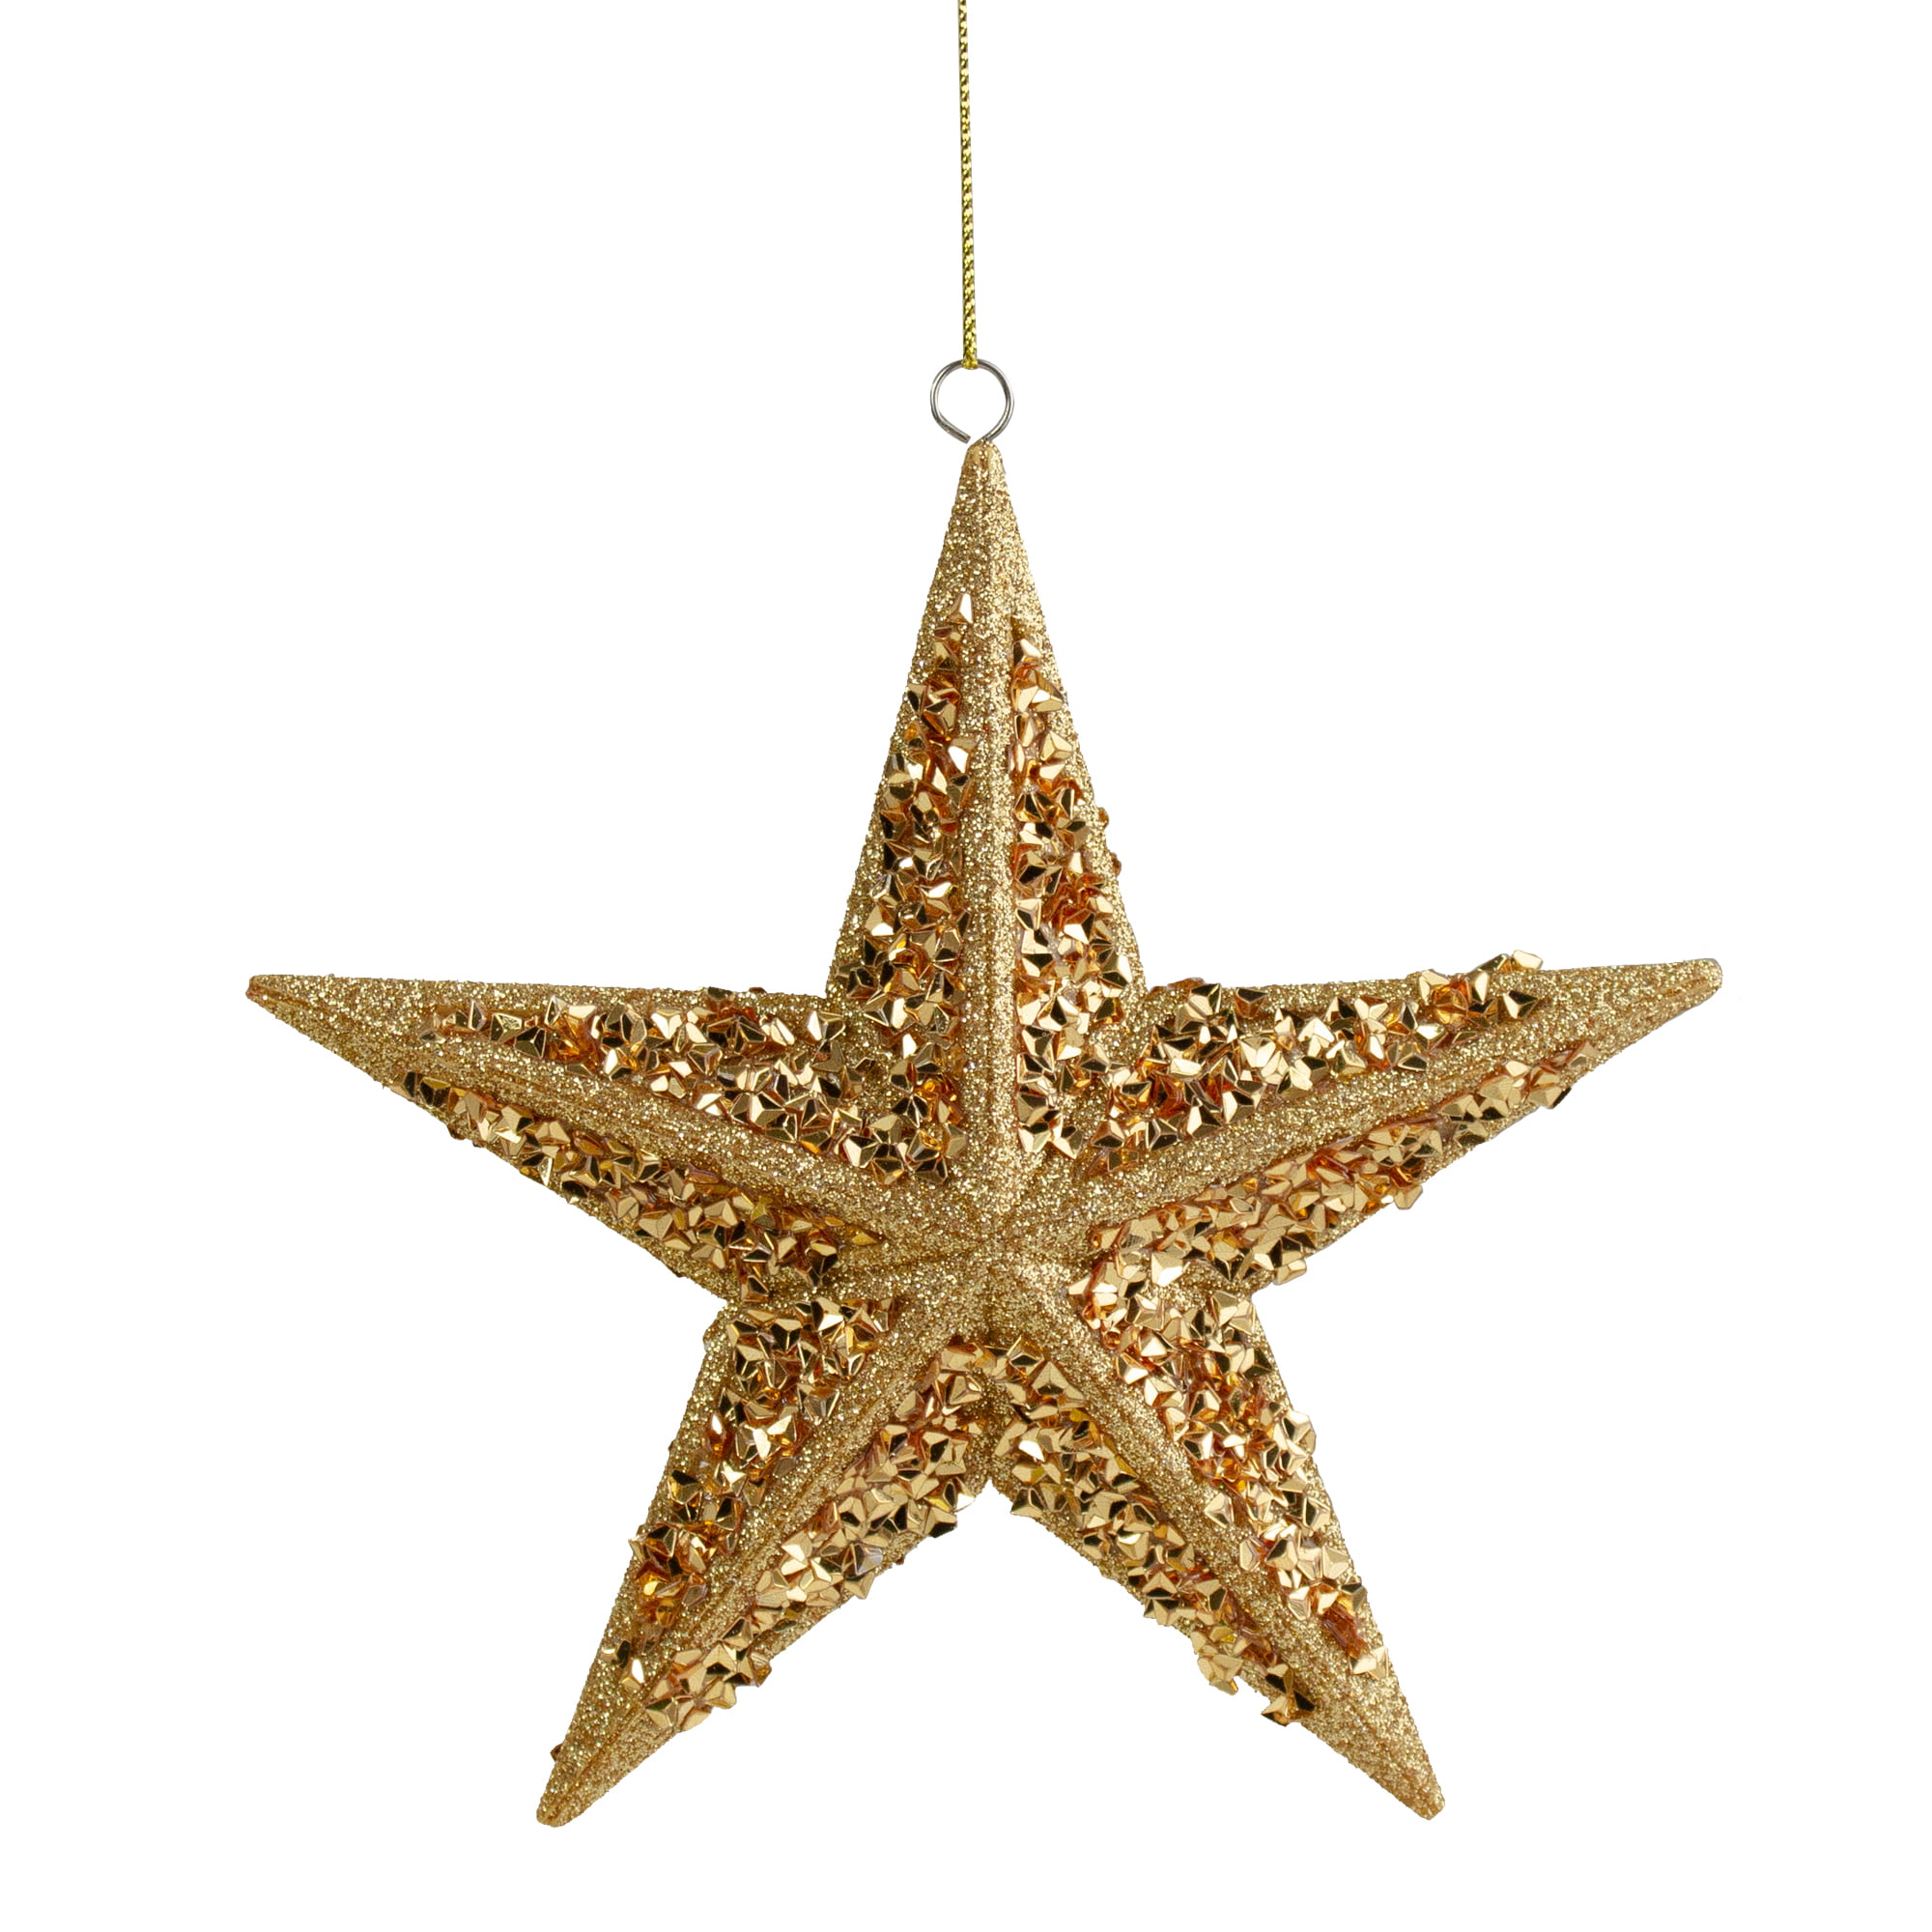 GOLD STAR Sparkly Wooden Metallic Glitter Bunting Christmas decoration 